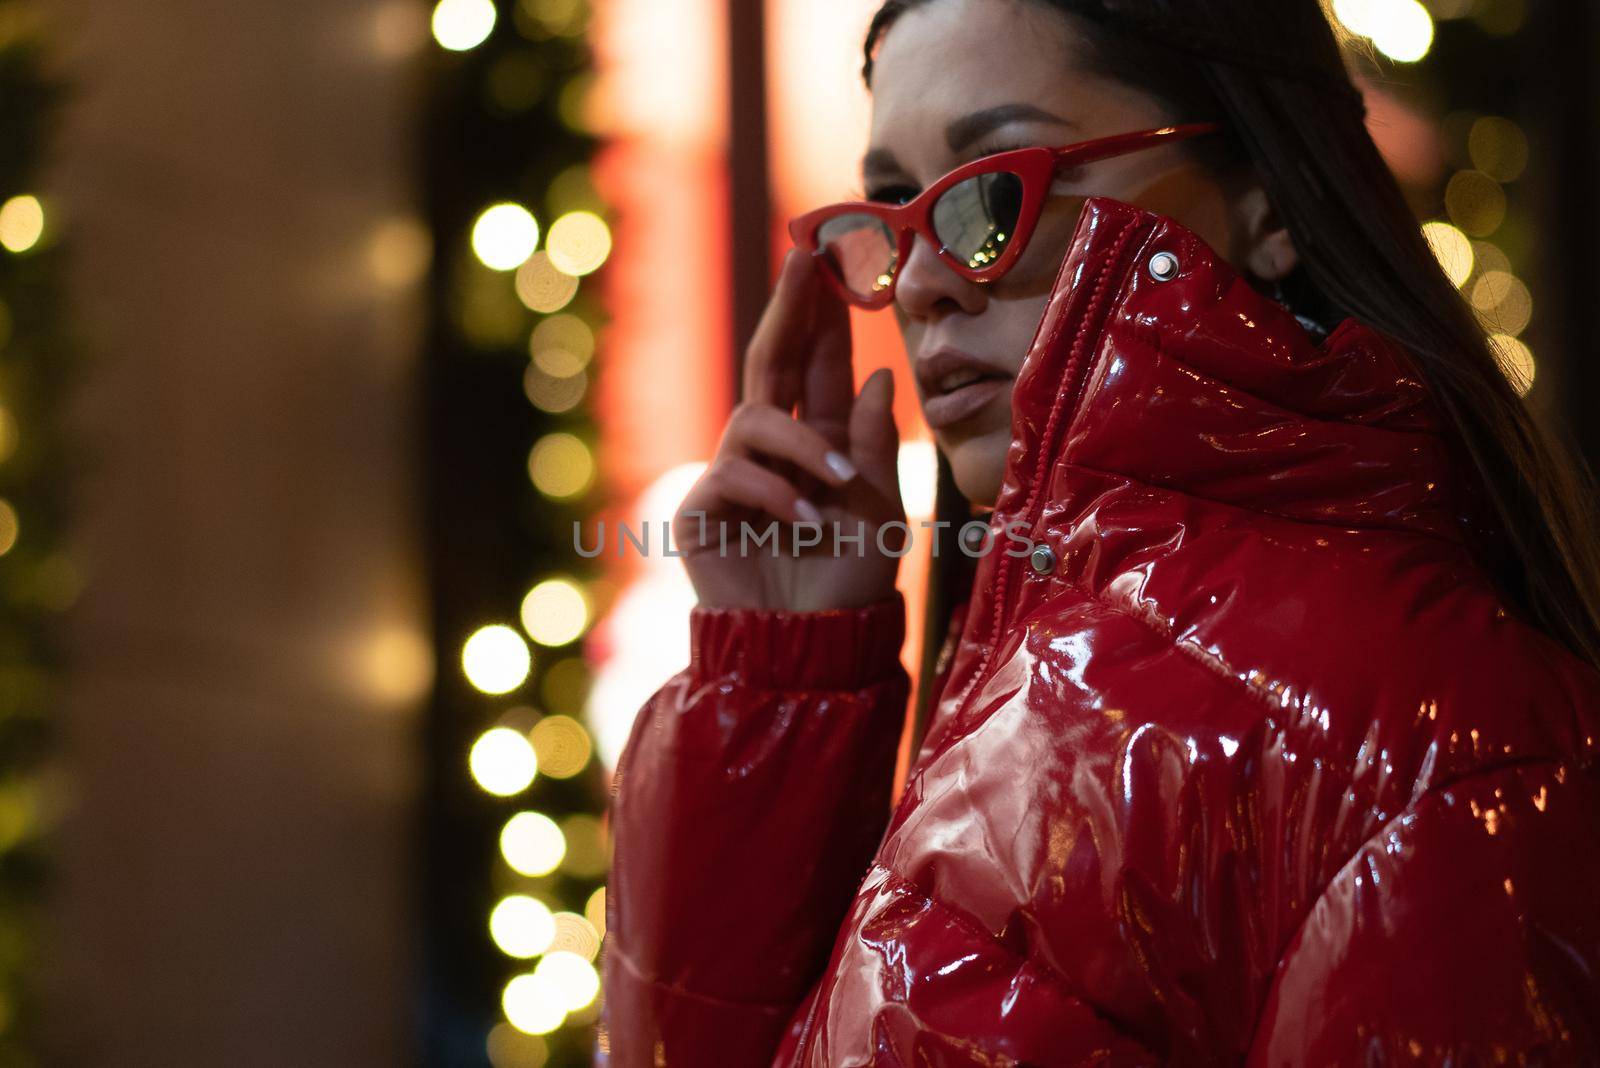 Model fashion girl in sun glasses with braided hair and red glossy coat standing outdoors in night city background. Night life concept. Night club life concept.